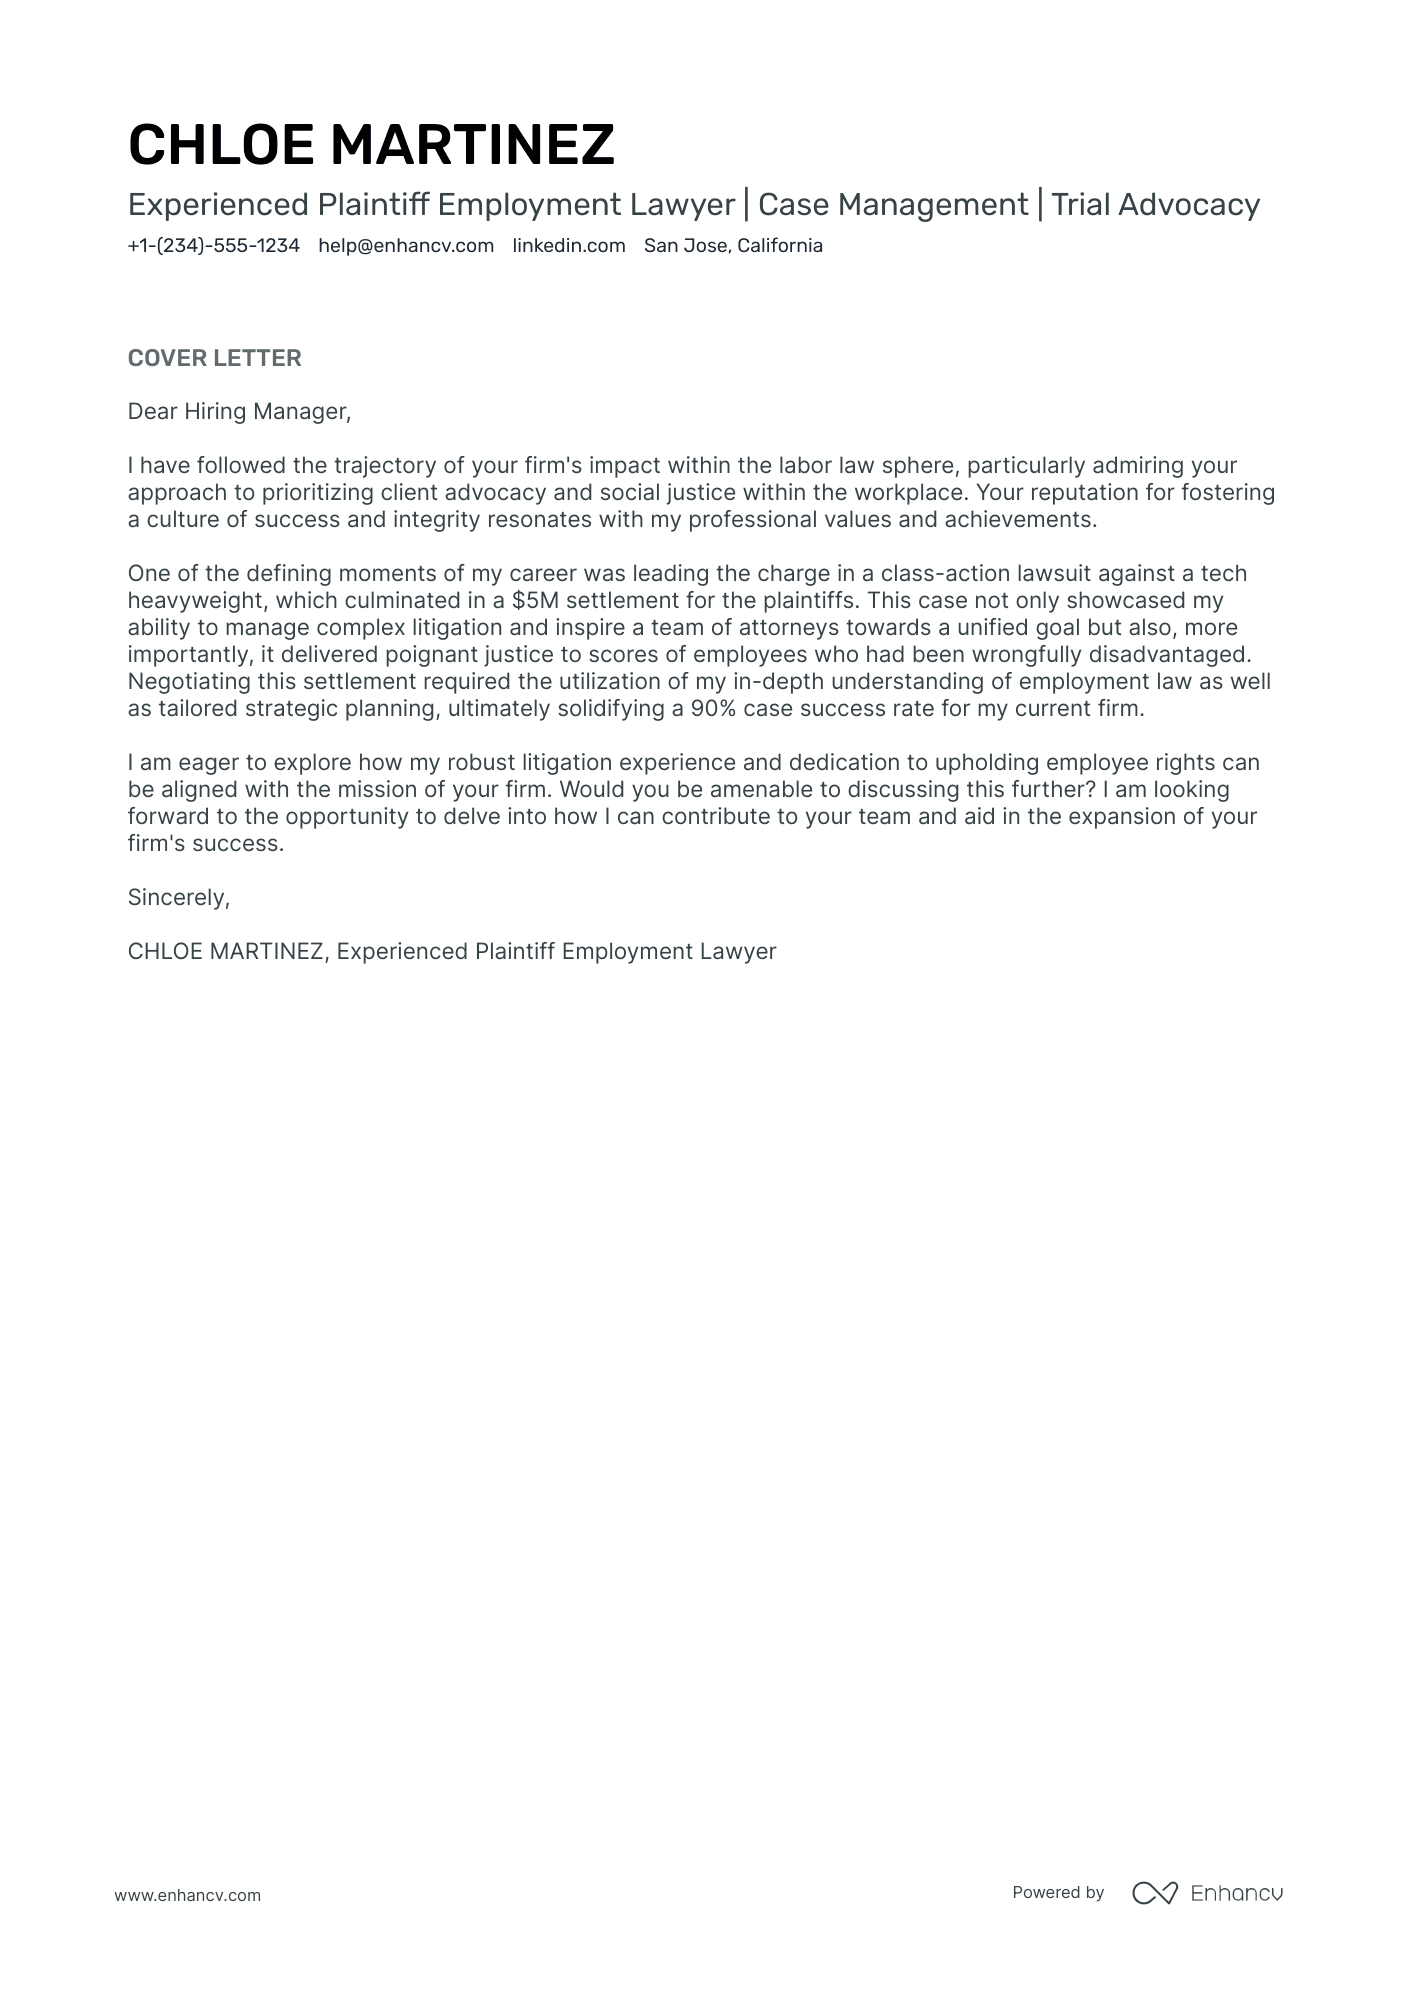 Employment Lawyer cover letter